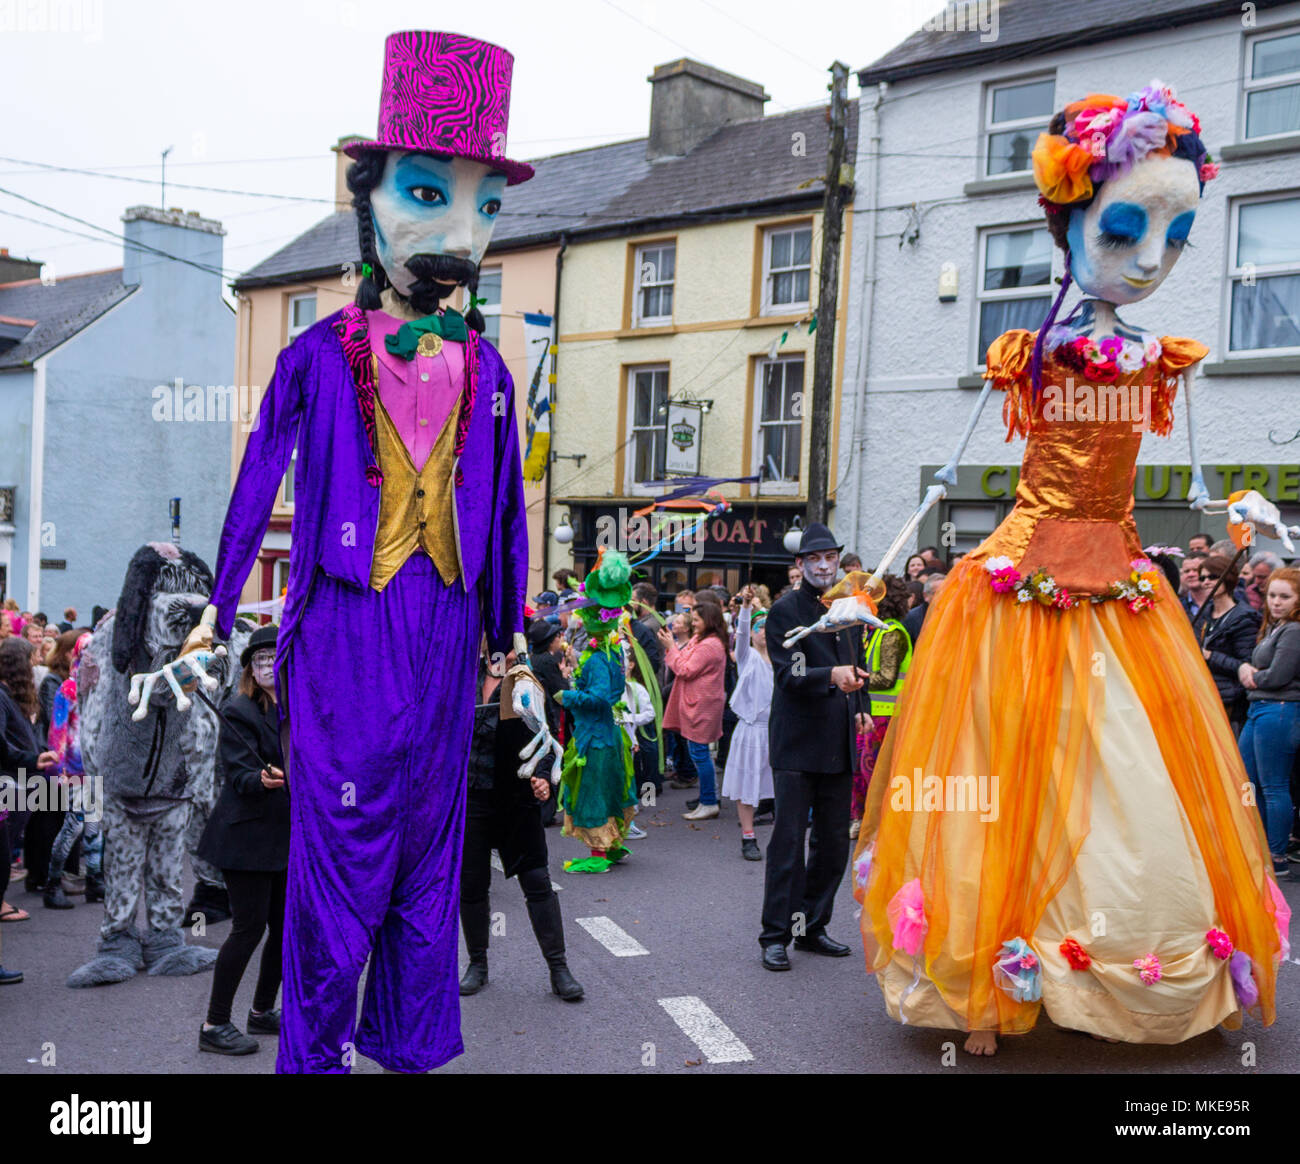 brightly coloured giant puppets taking part in a street procession celebrating an annual jazz festival in ballydehob, ireland. Stock Photo